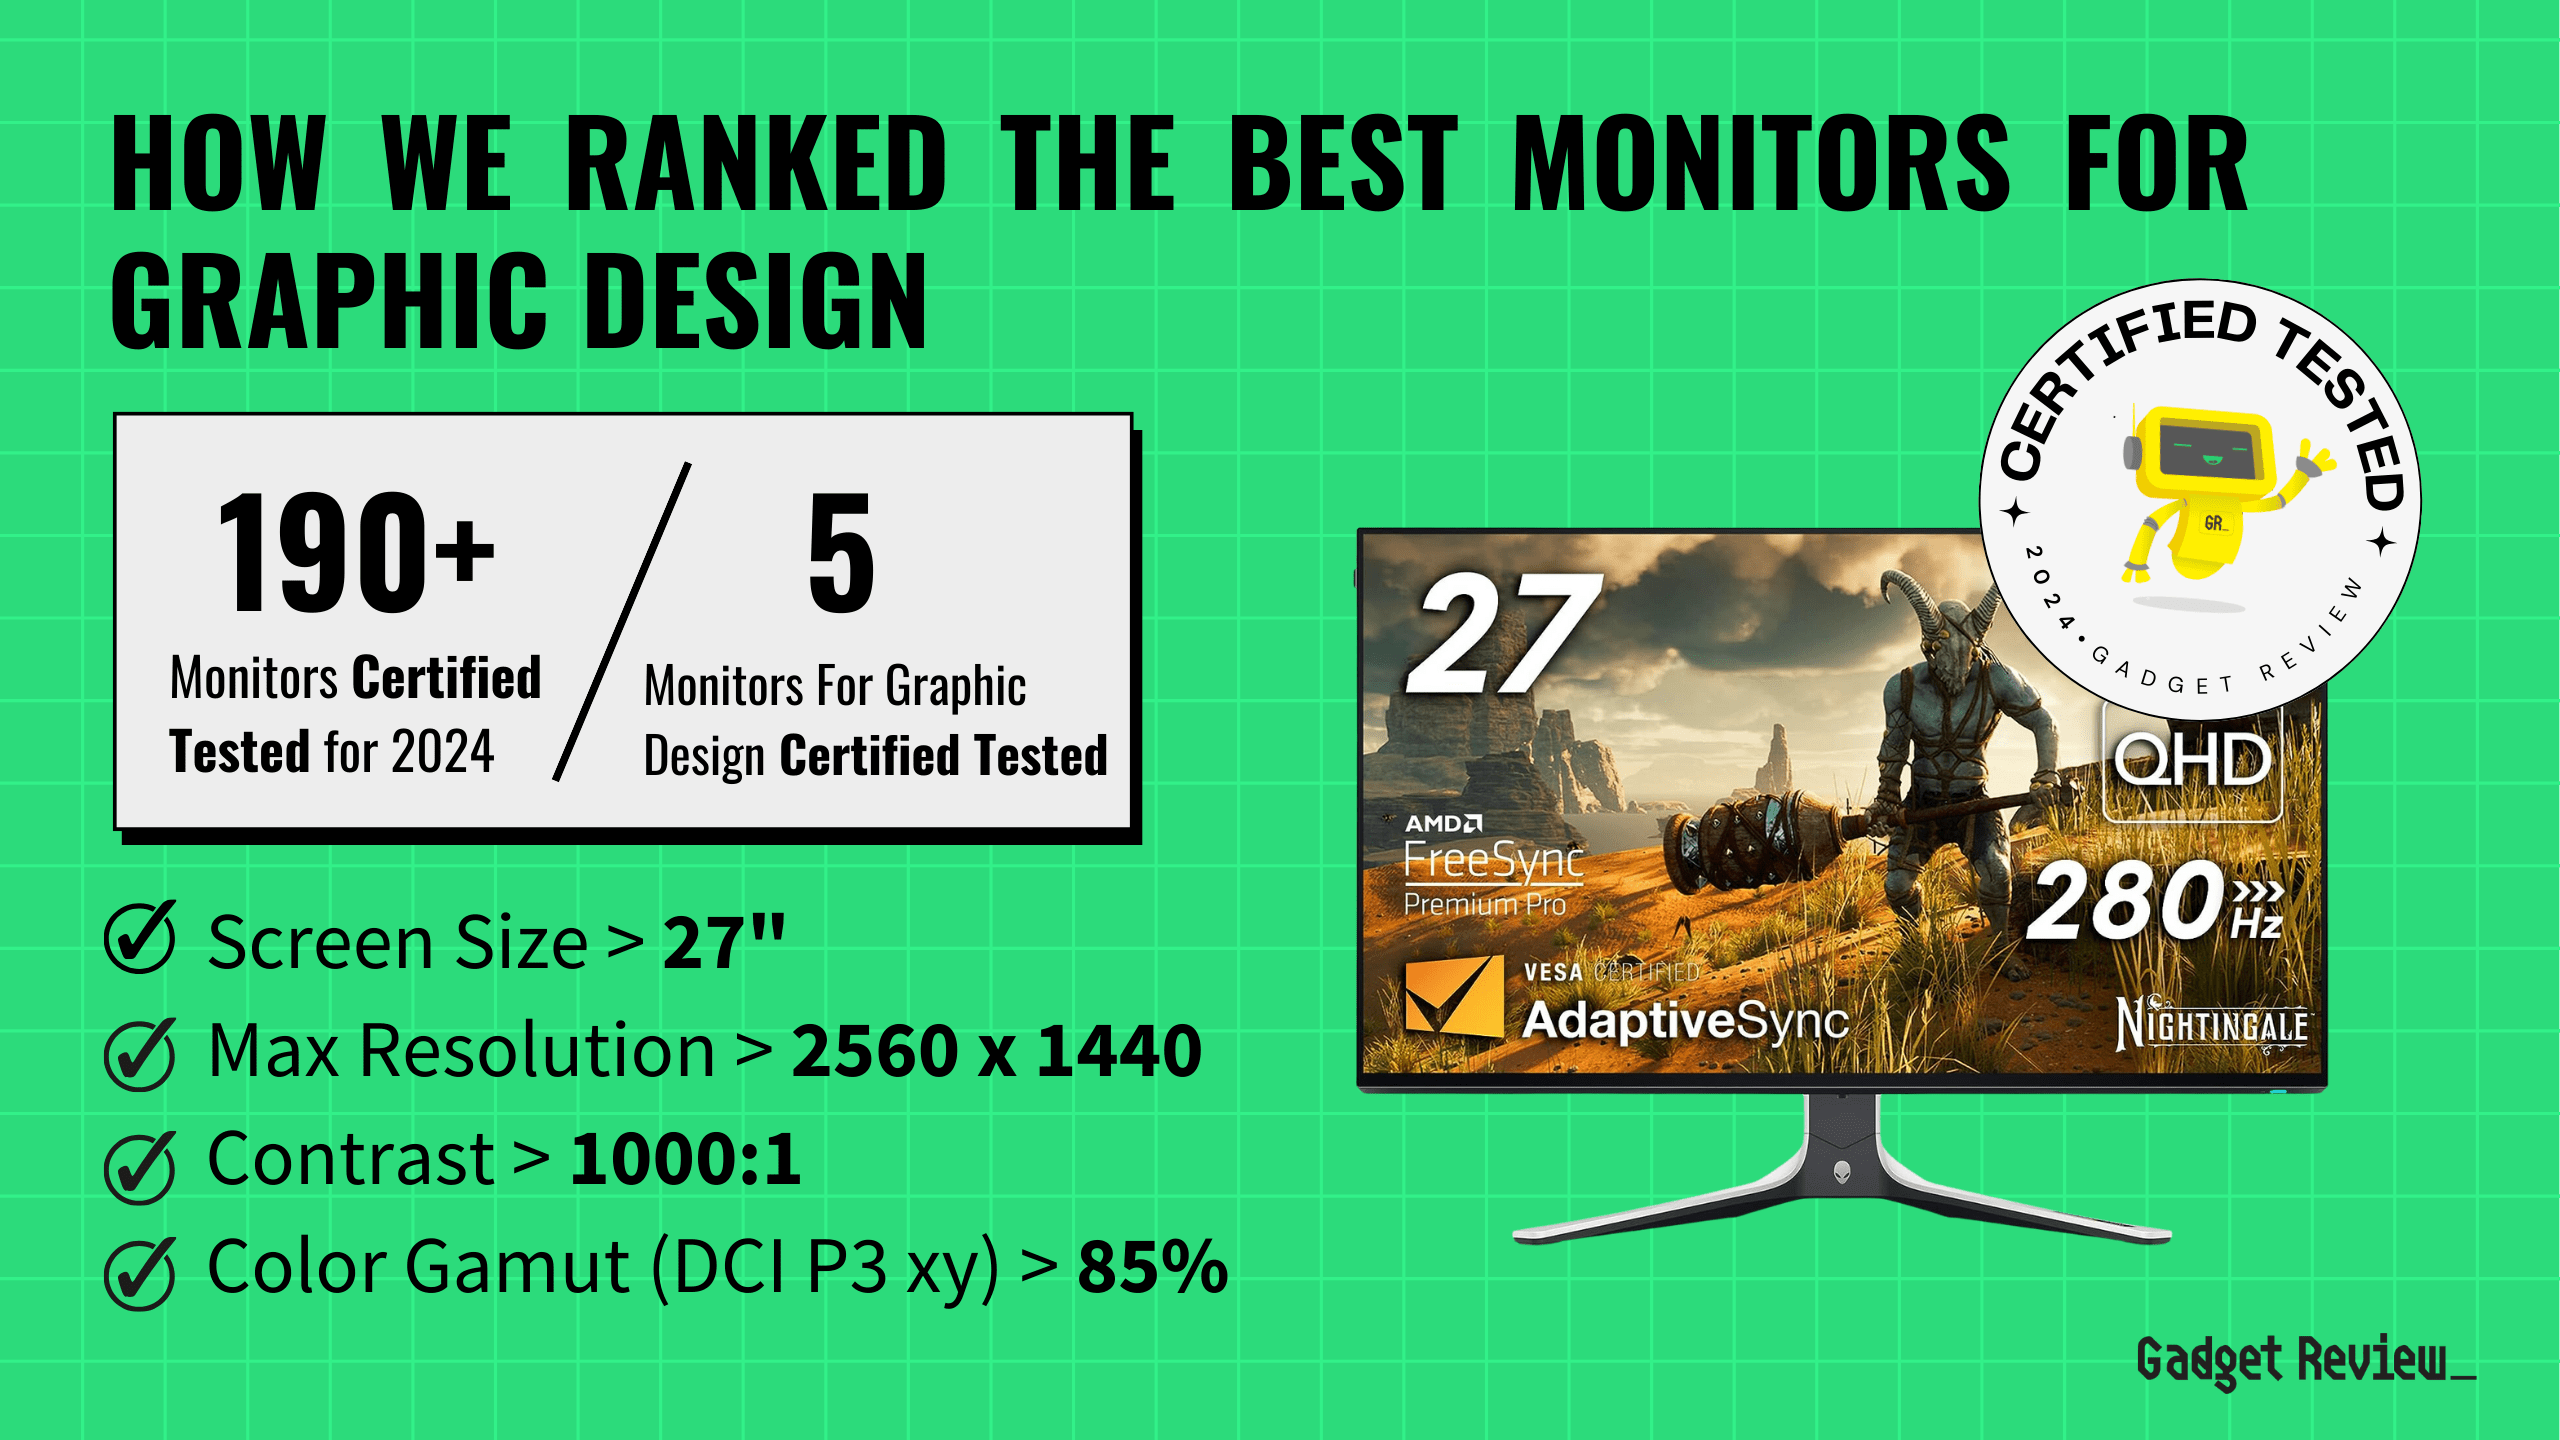 best monitors graphic design guide that shows the top best computer monitor model